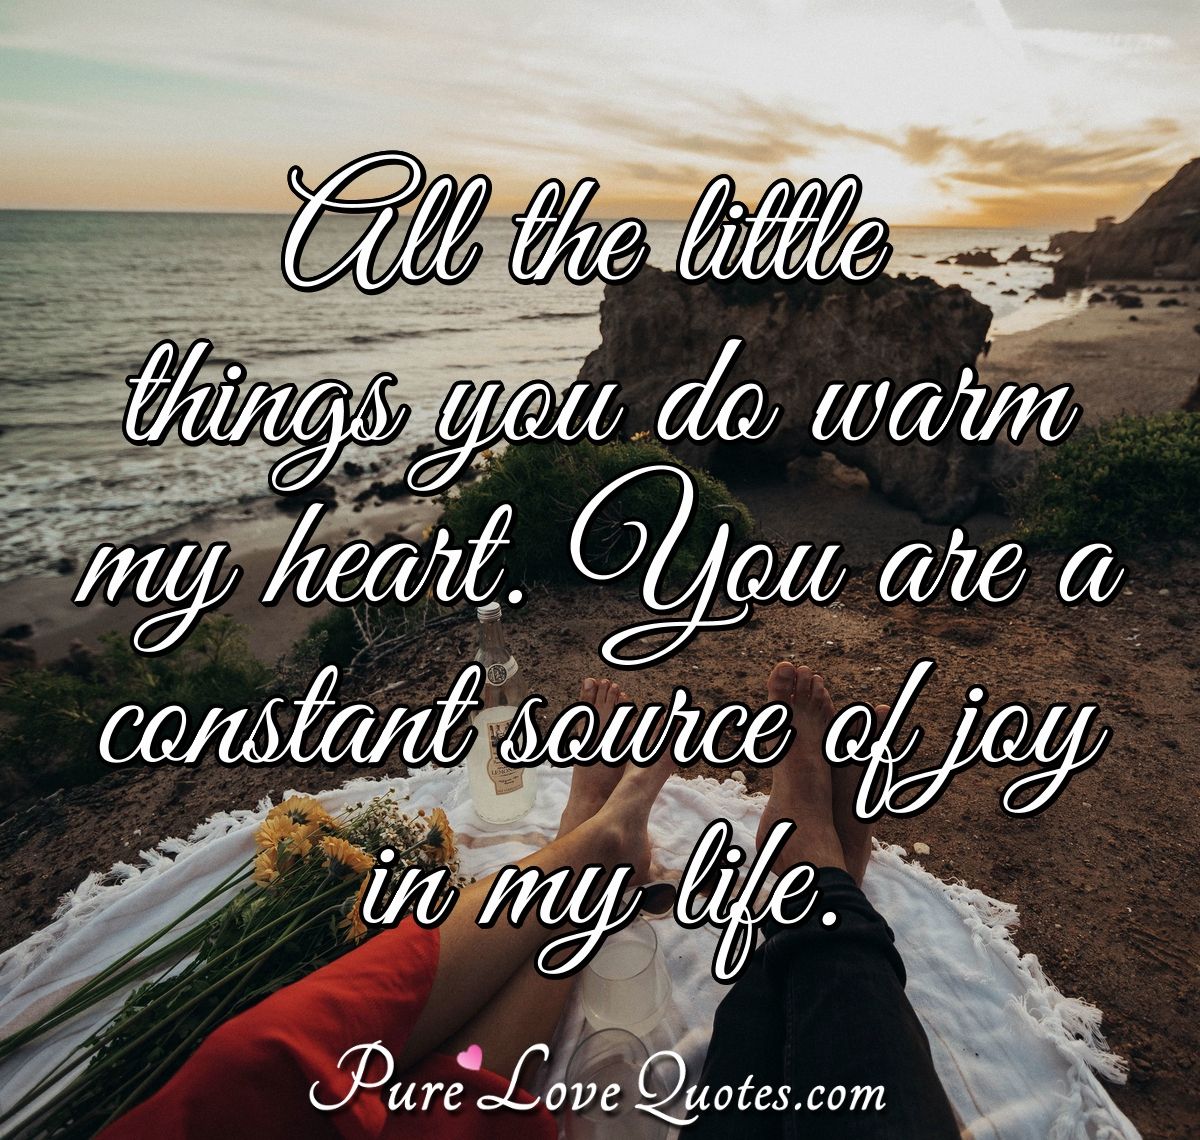 All The Little Things You Do Warm My Heart You Are A Constant Source Of Joy In Purelovequotes